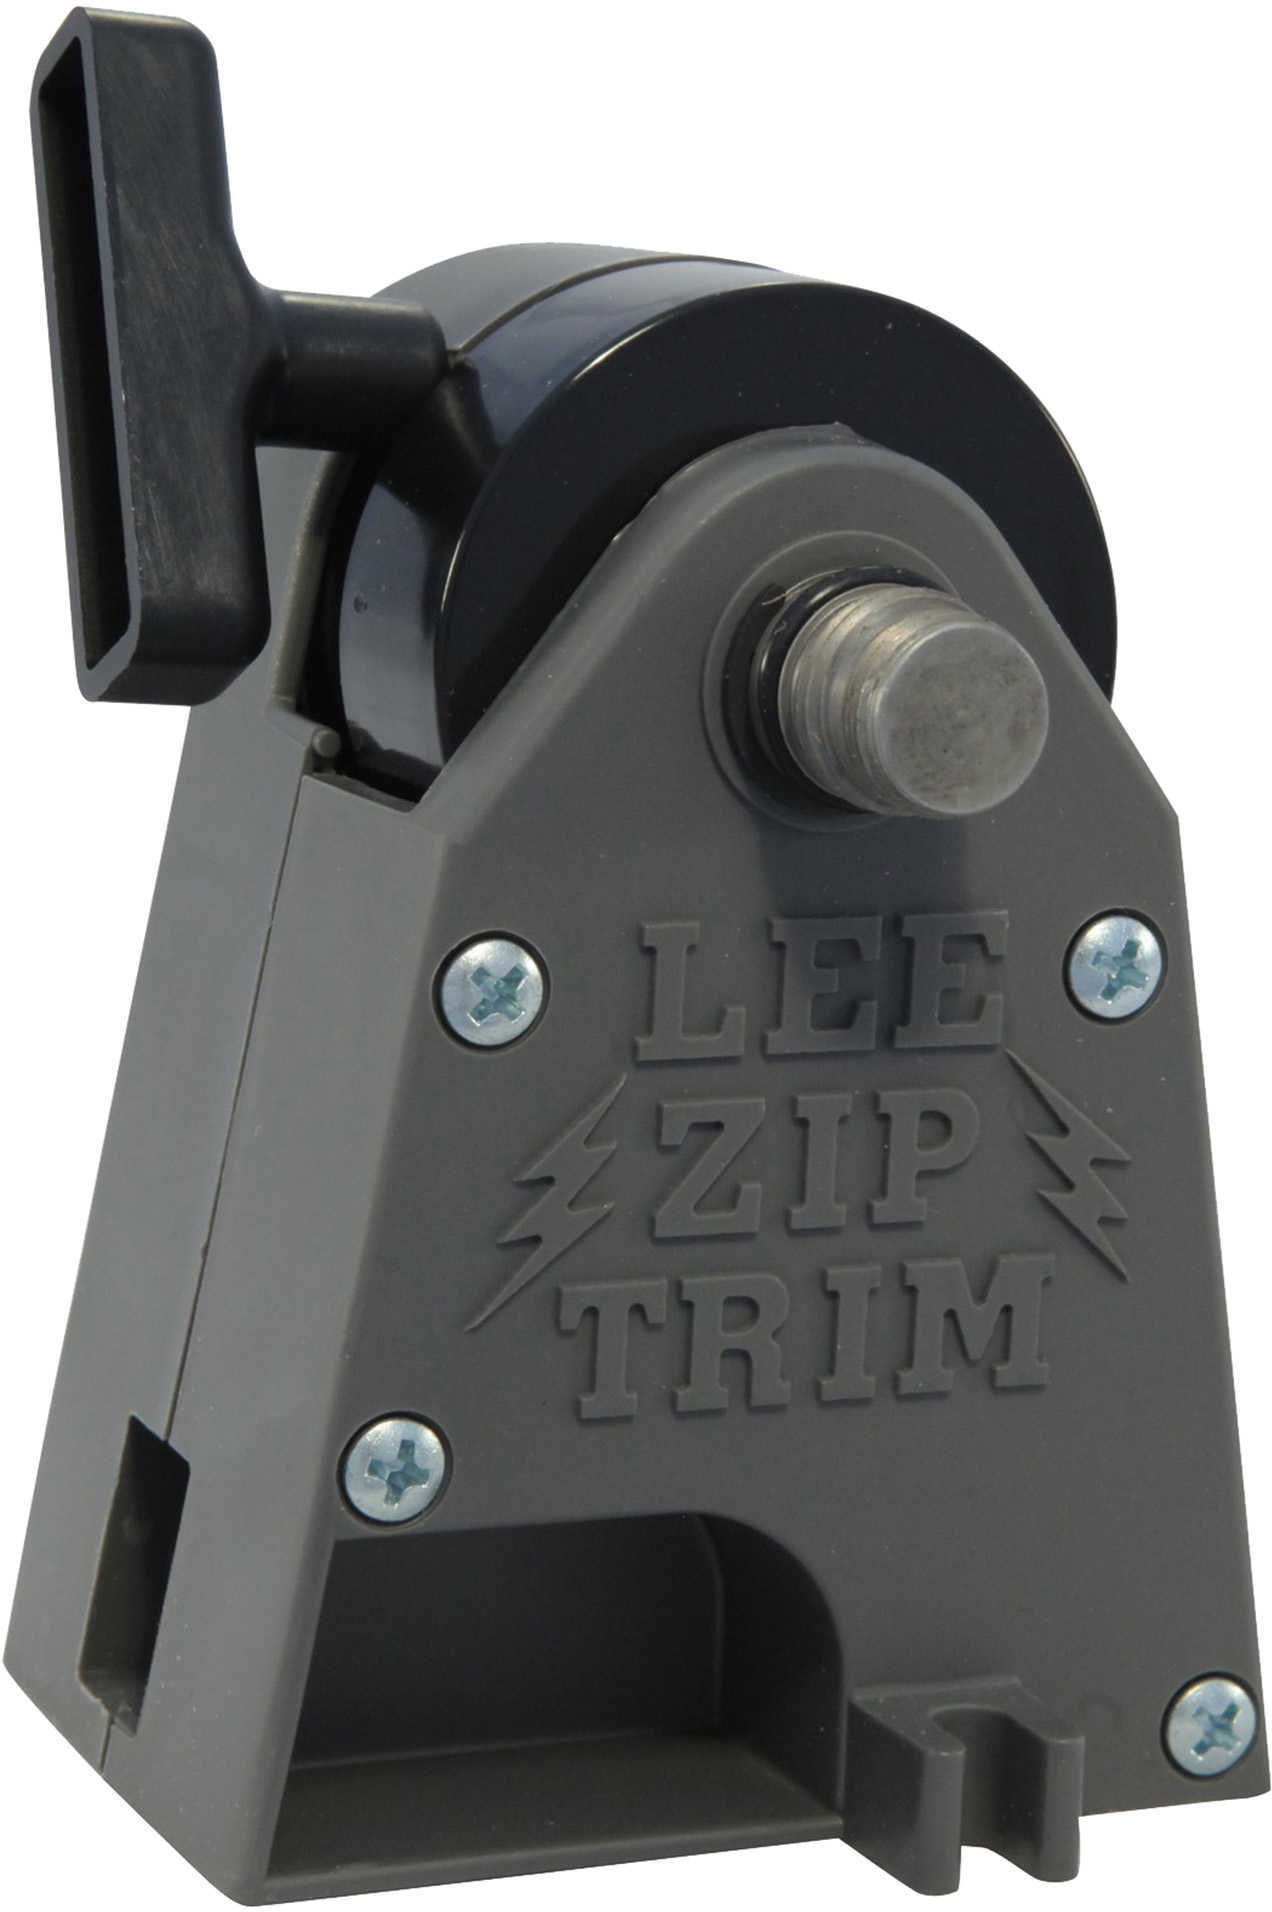 Lee Zip Trim Power Head For All Calibers Md: 90899